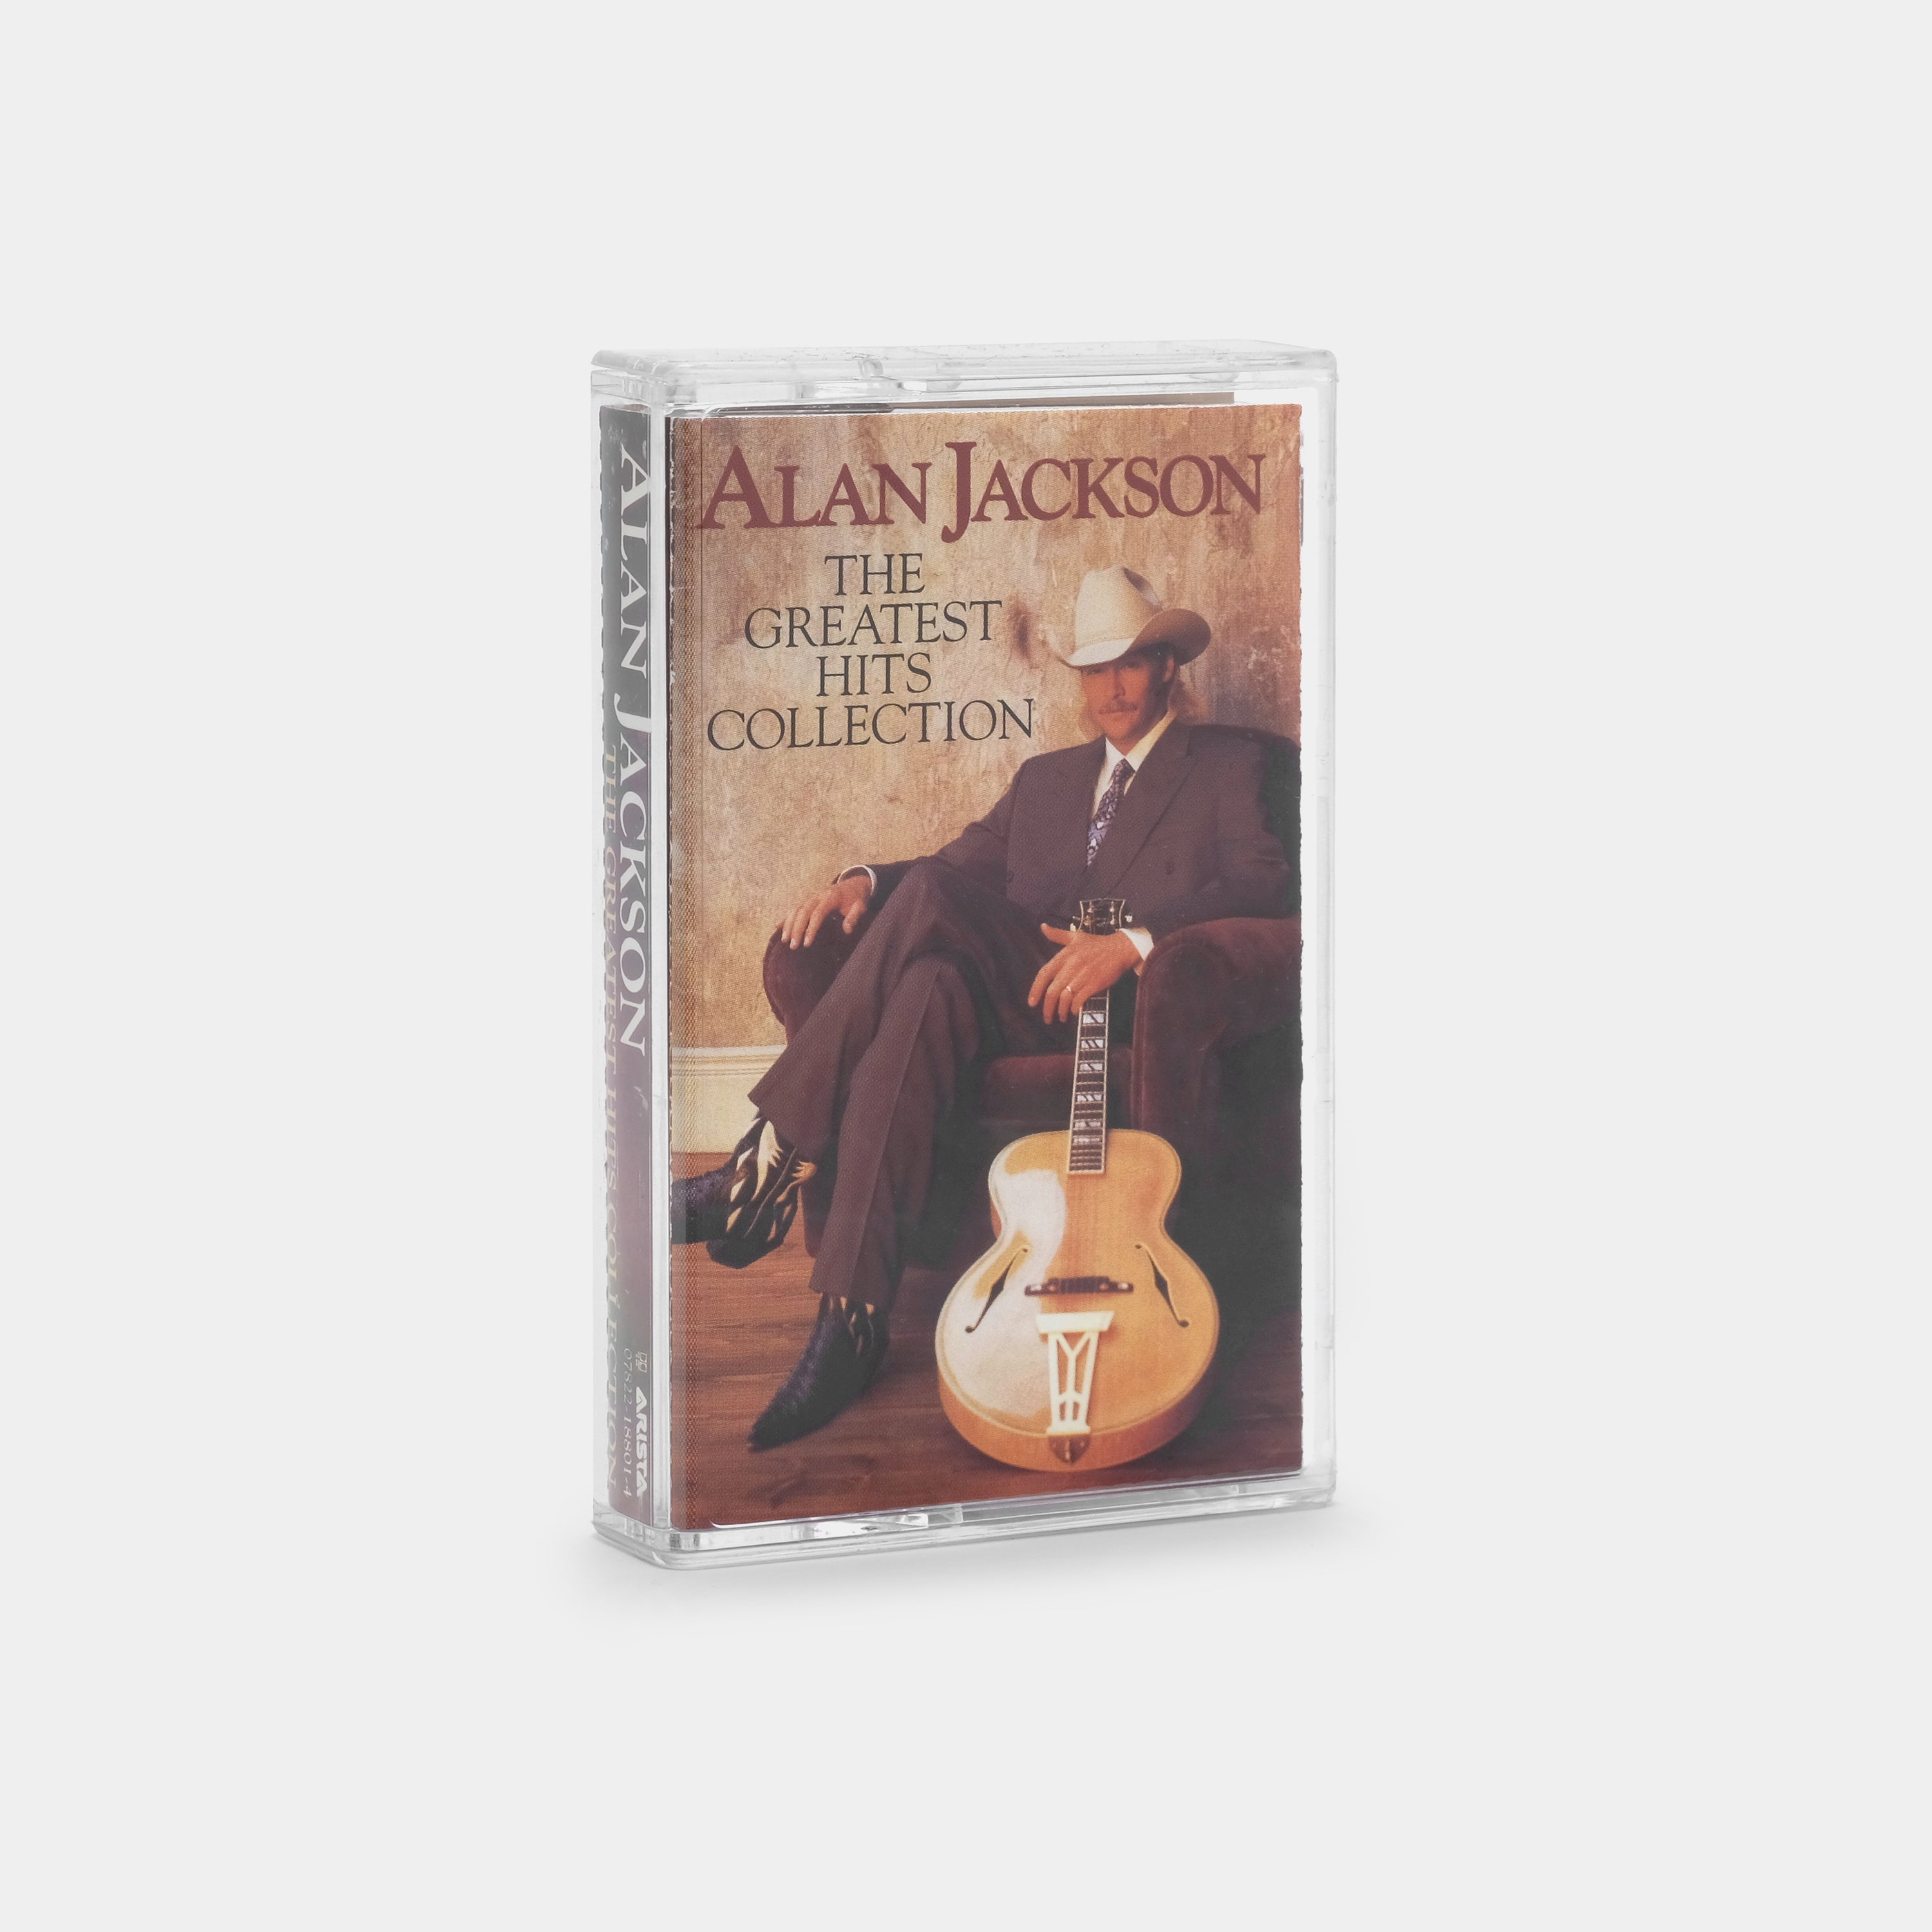 Alan Jackson - The Greatest Hits Collection Cassette Tape